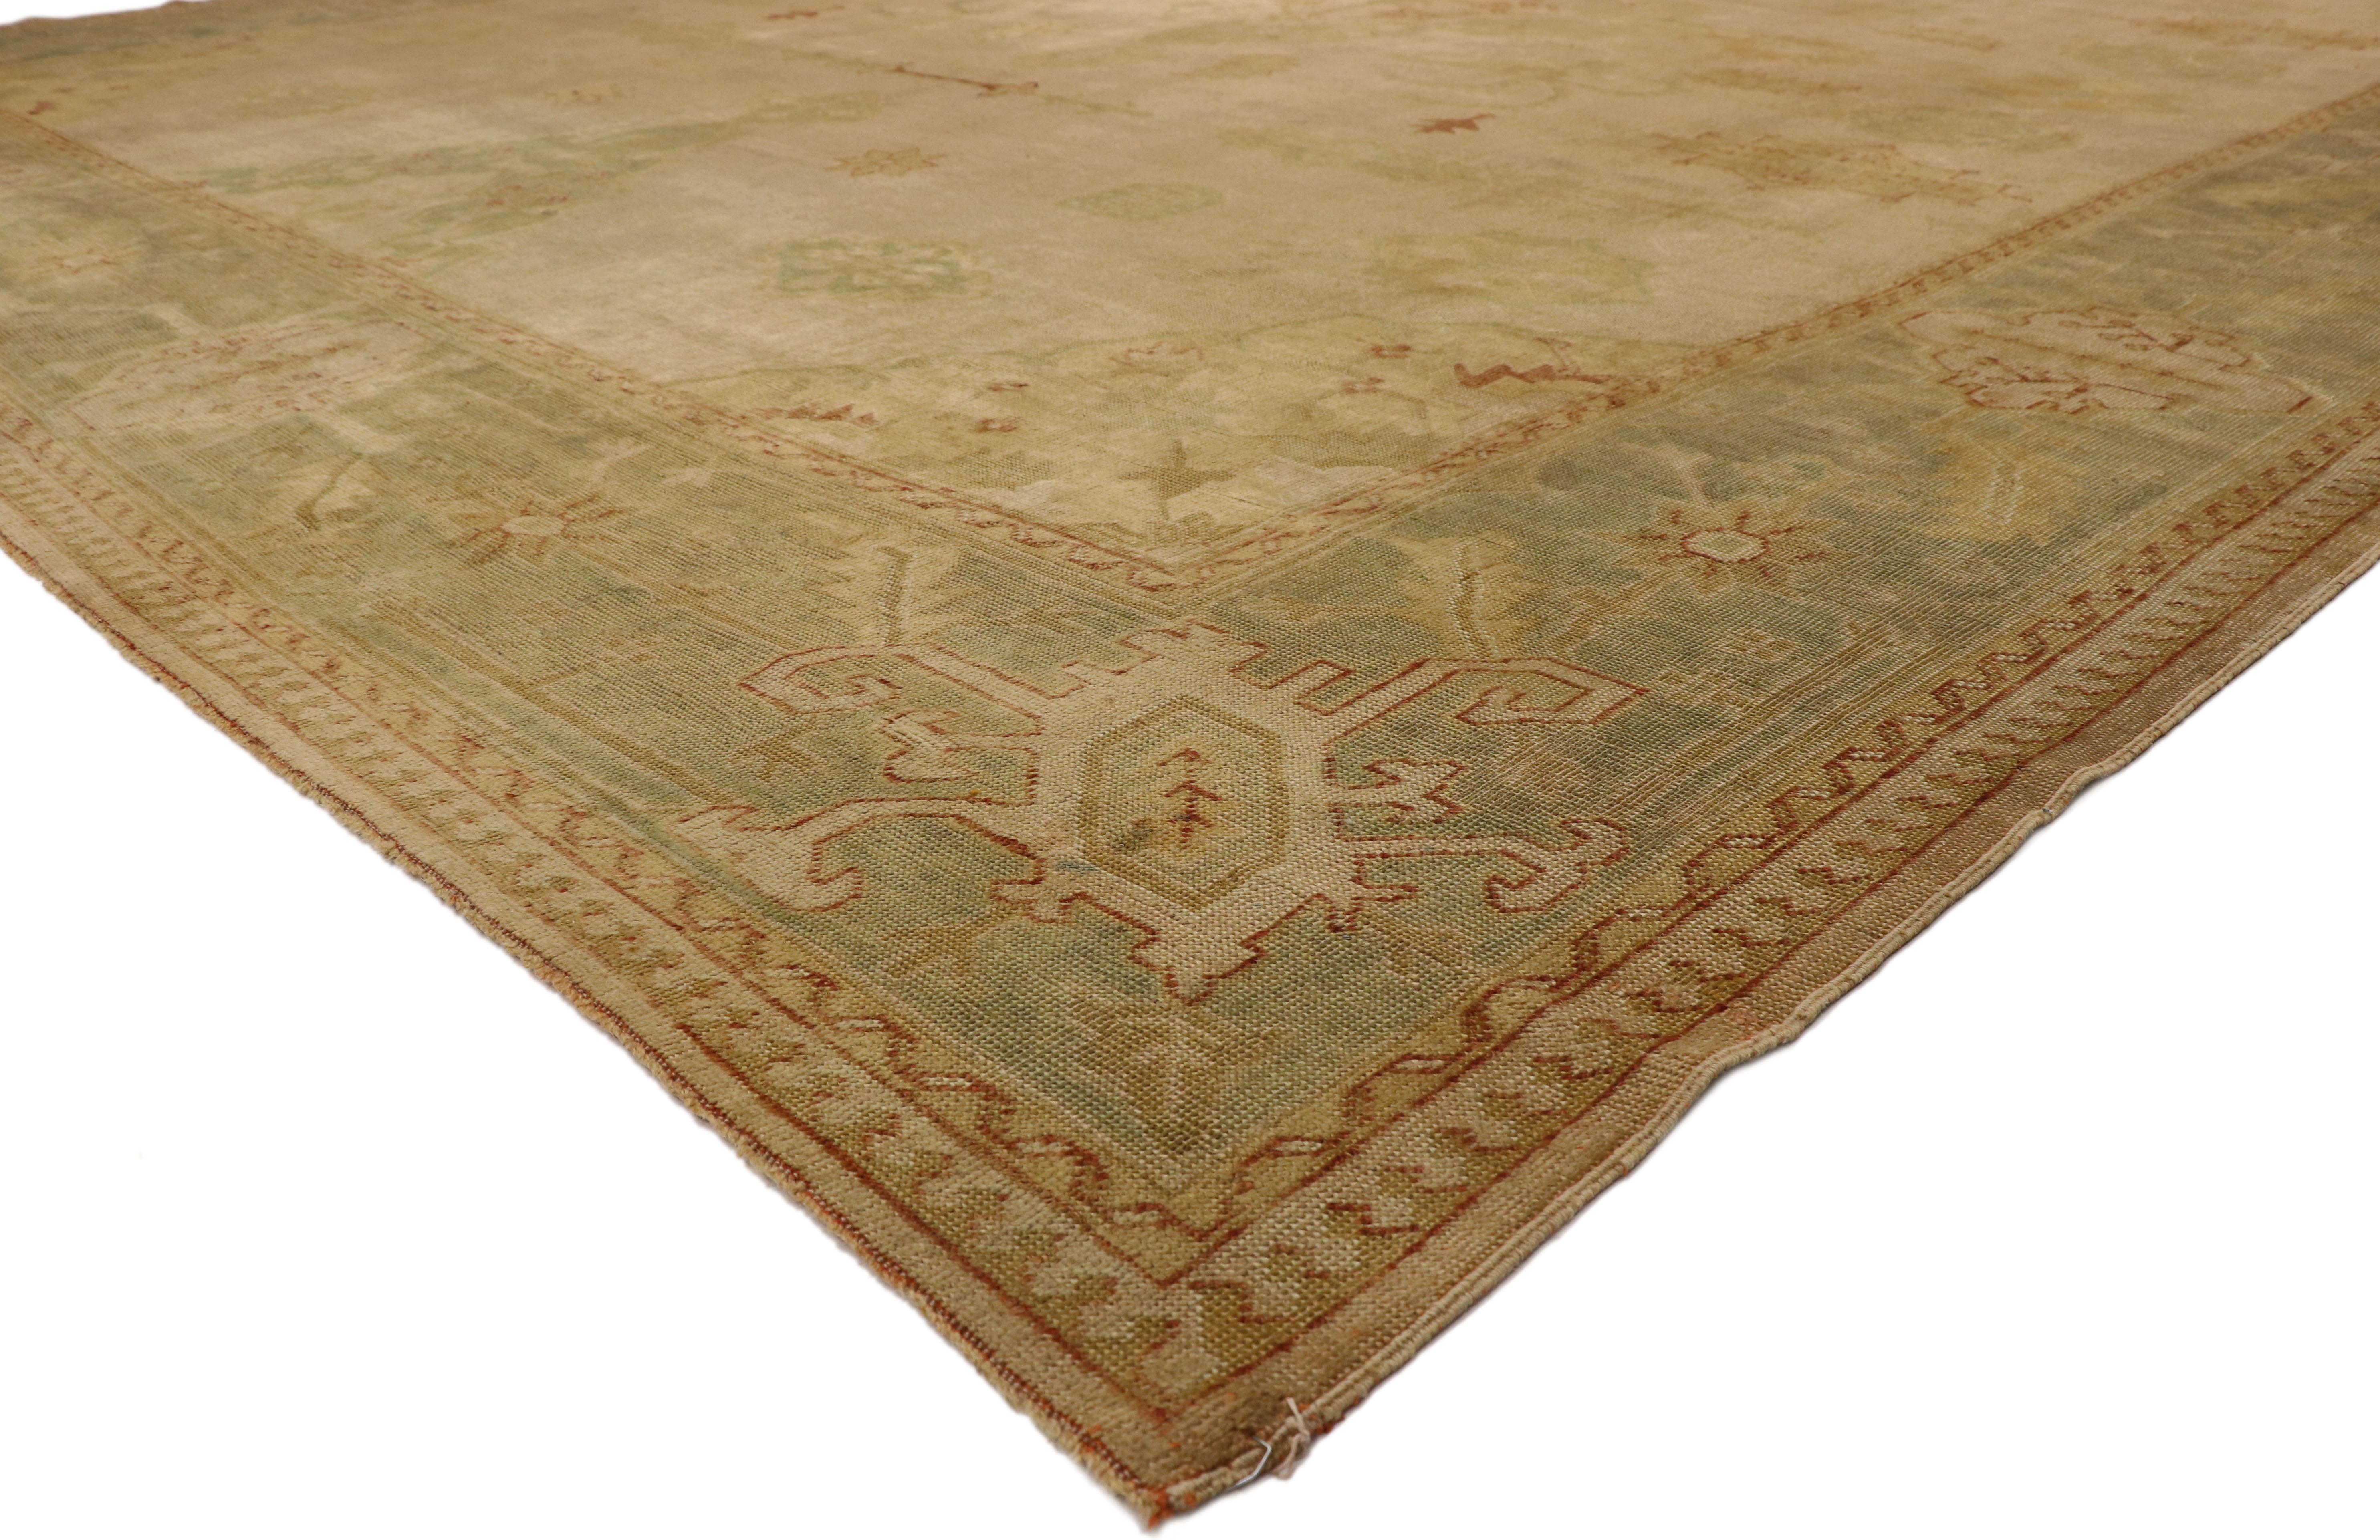 74842 Antique Turkish Oushak Rug 13'10 x 17'07. Effortless beauty with rustic sensibility, this hand-knotted wool antique Turkish Oushak rug imparts a sense of warmth and welcomed informality. Taking center stage is a cusped lozenge medallion